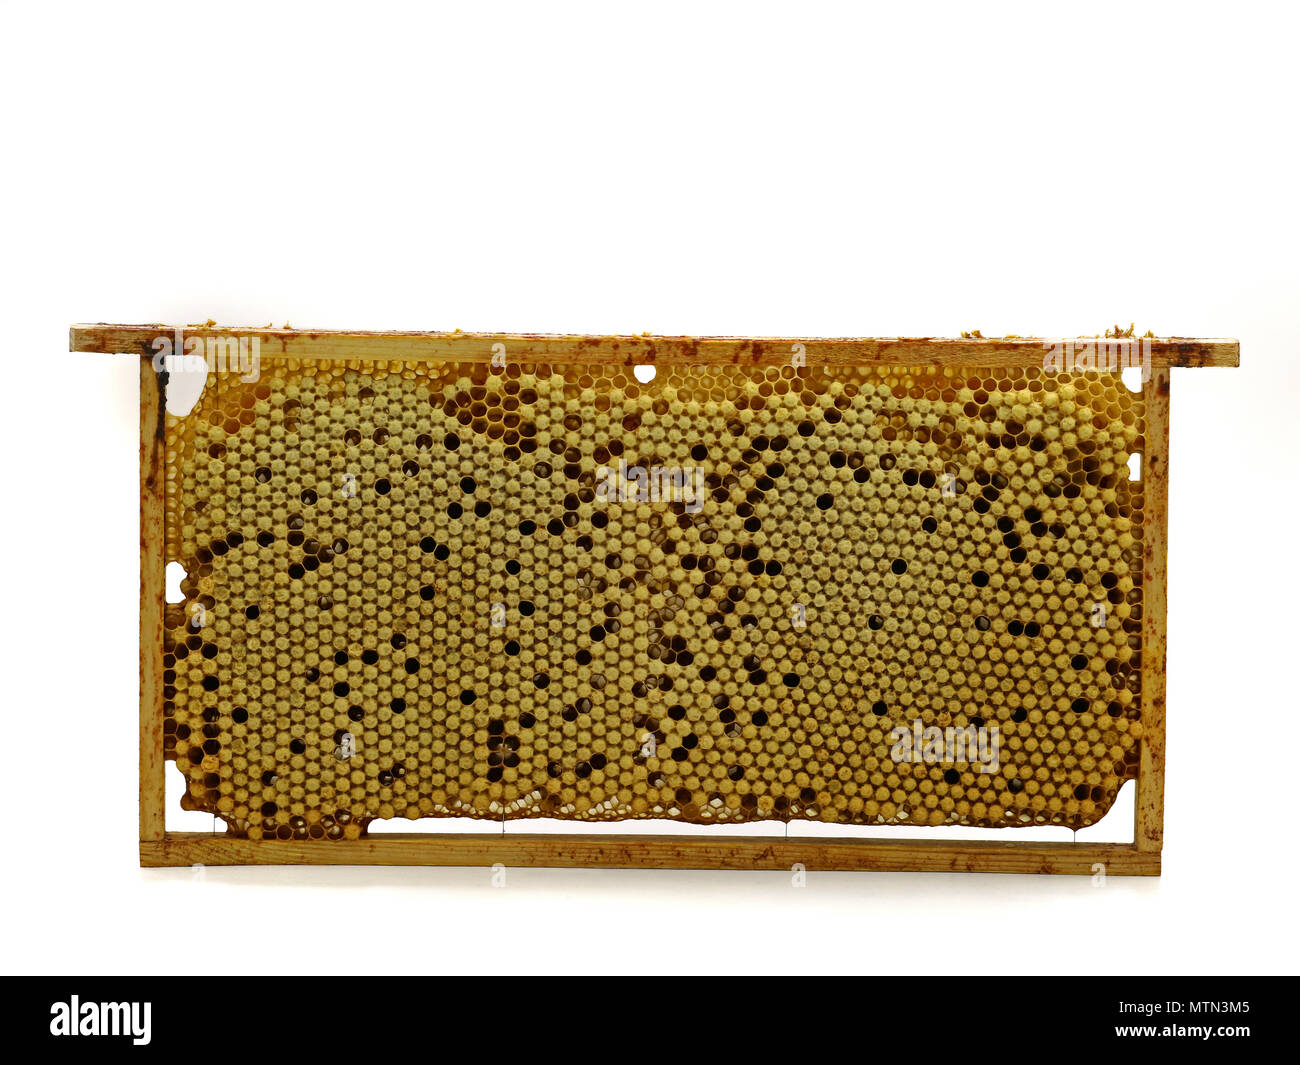 whole bee comb with drone eggs, brood isolated on white background, front view Stock Photo